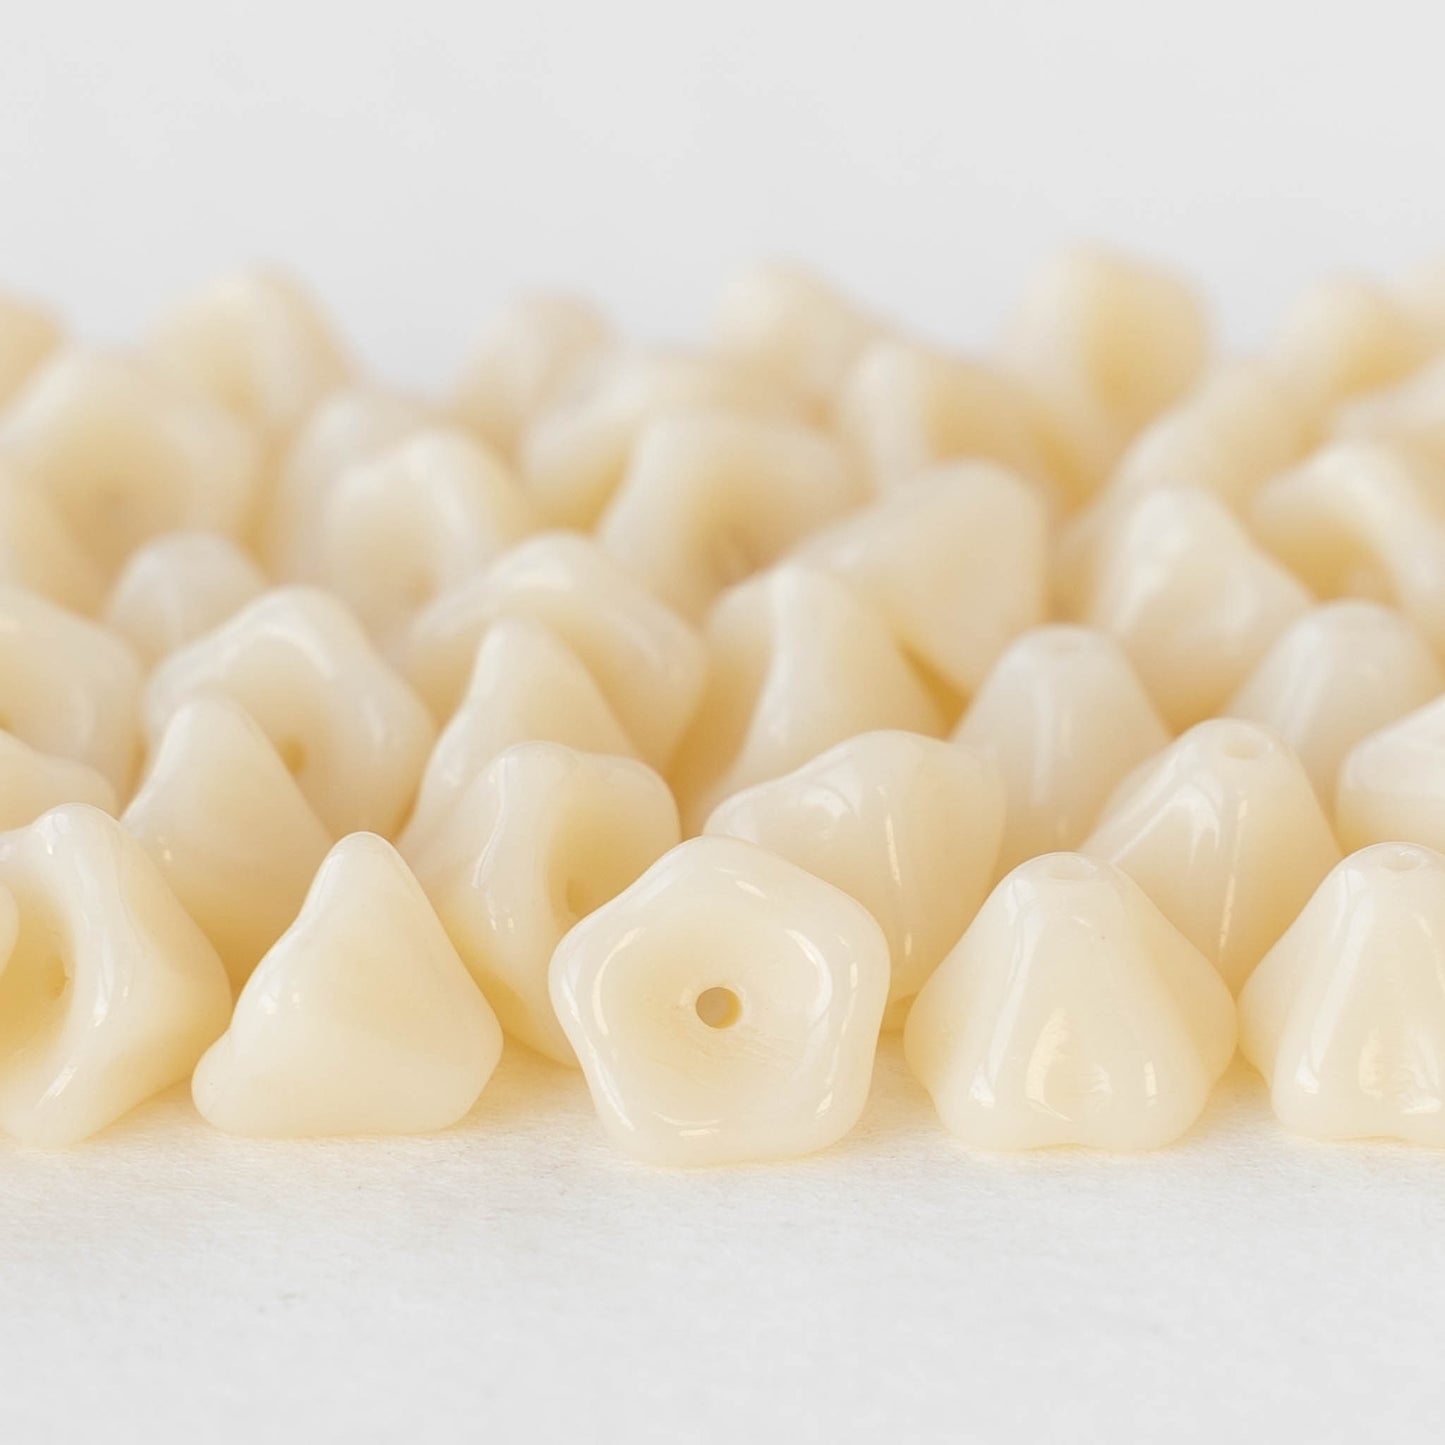 6x8mm Bell Flower Beads - Opaque Ivory White - 30